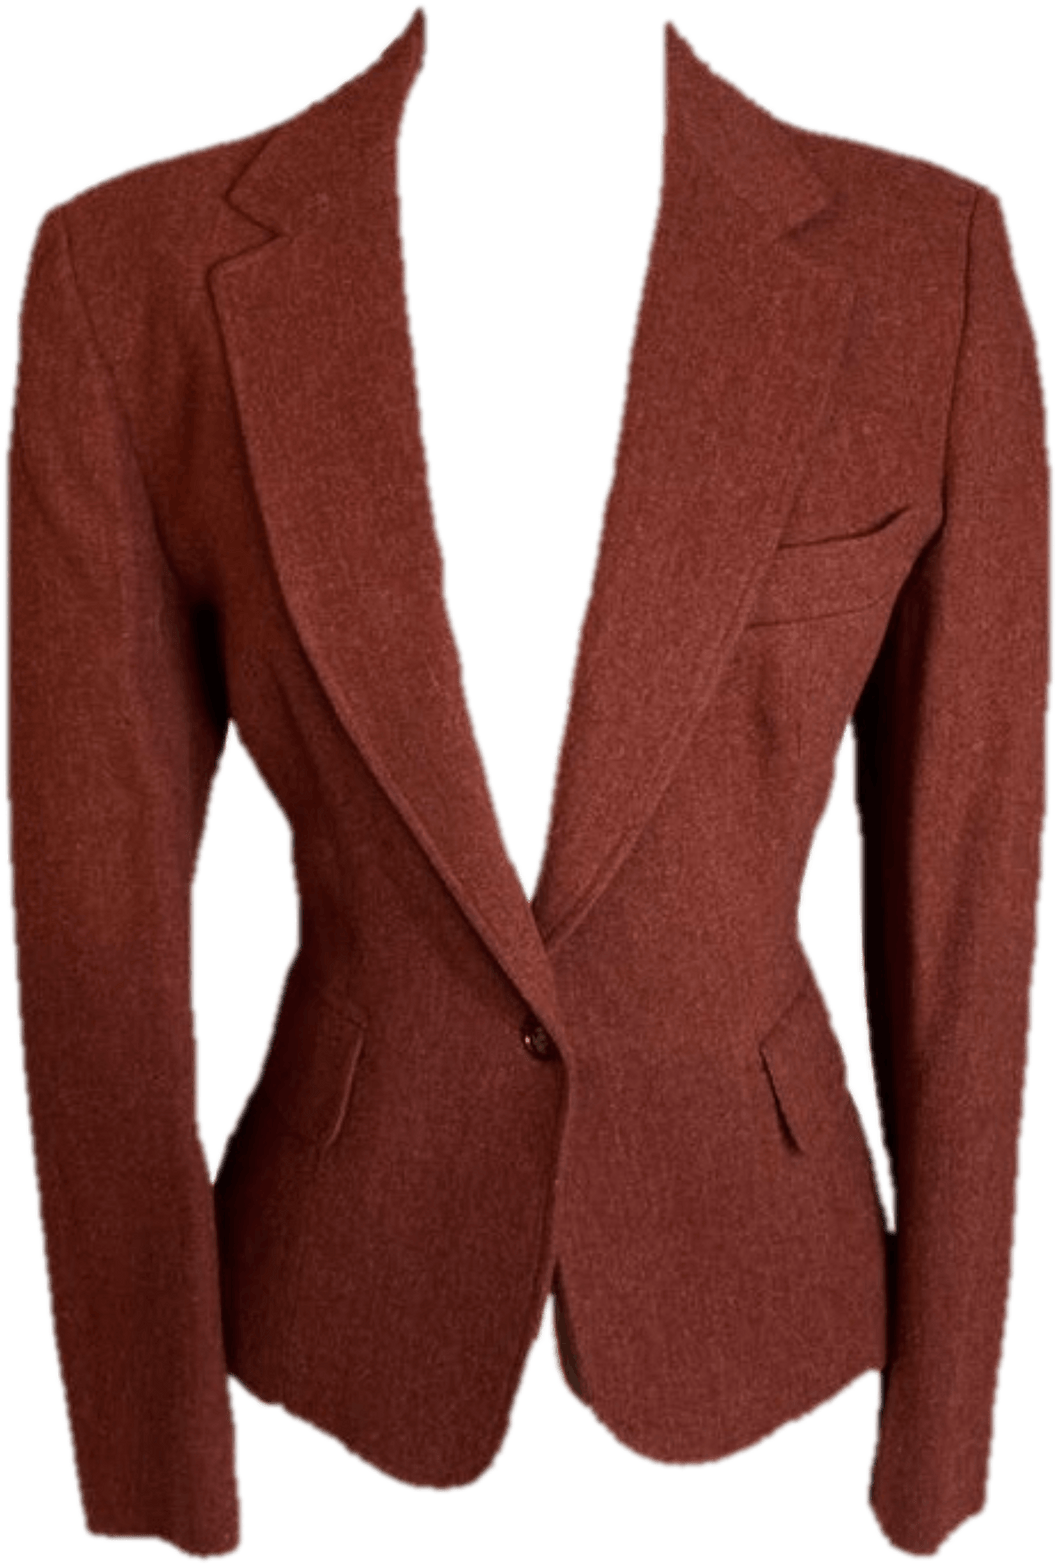 70’s Red Wool Blazer by Evan Picone